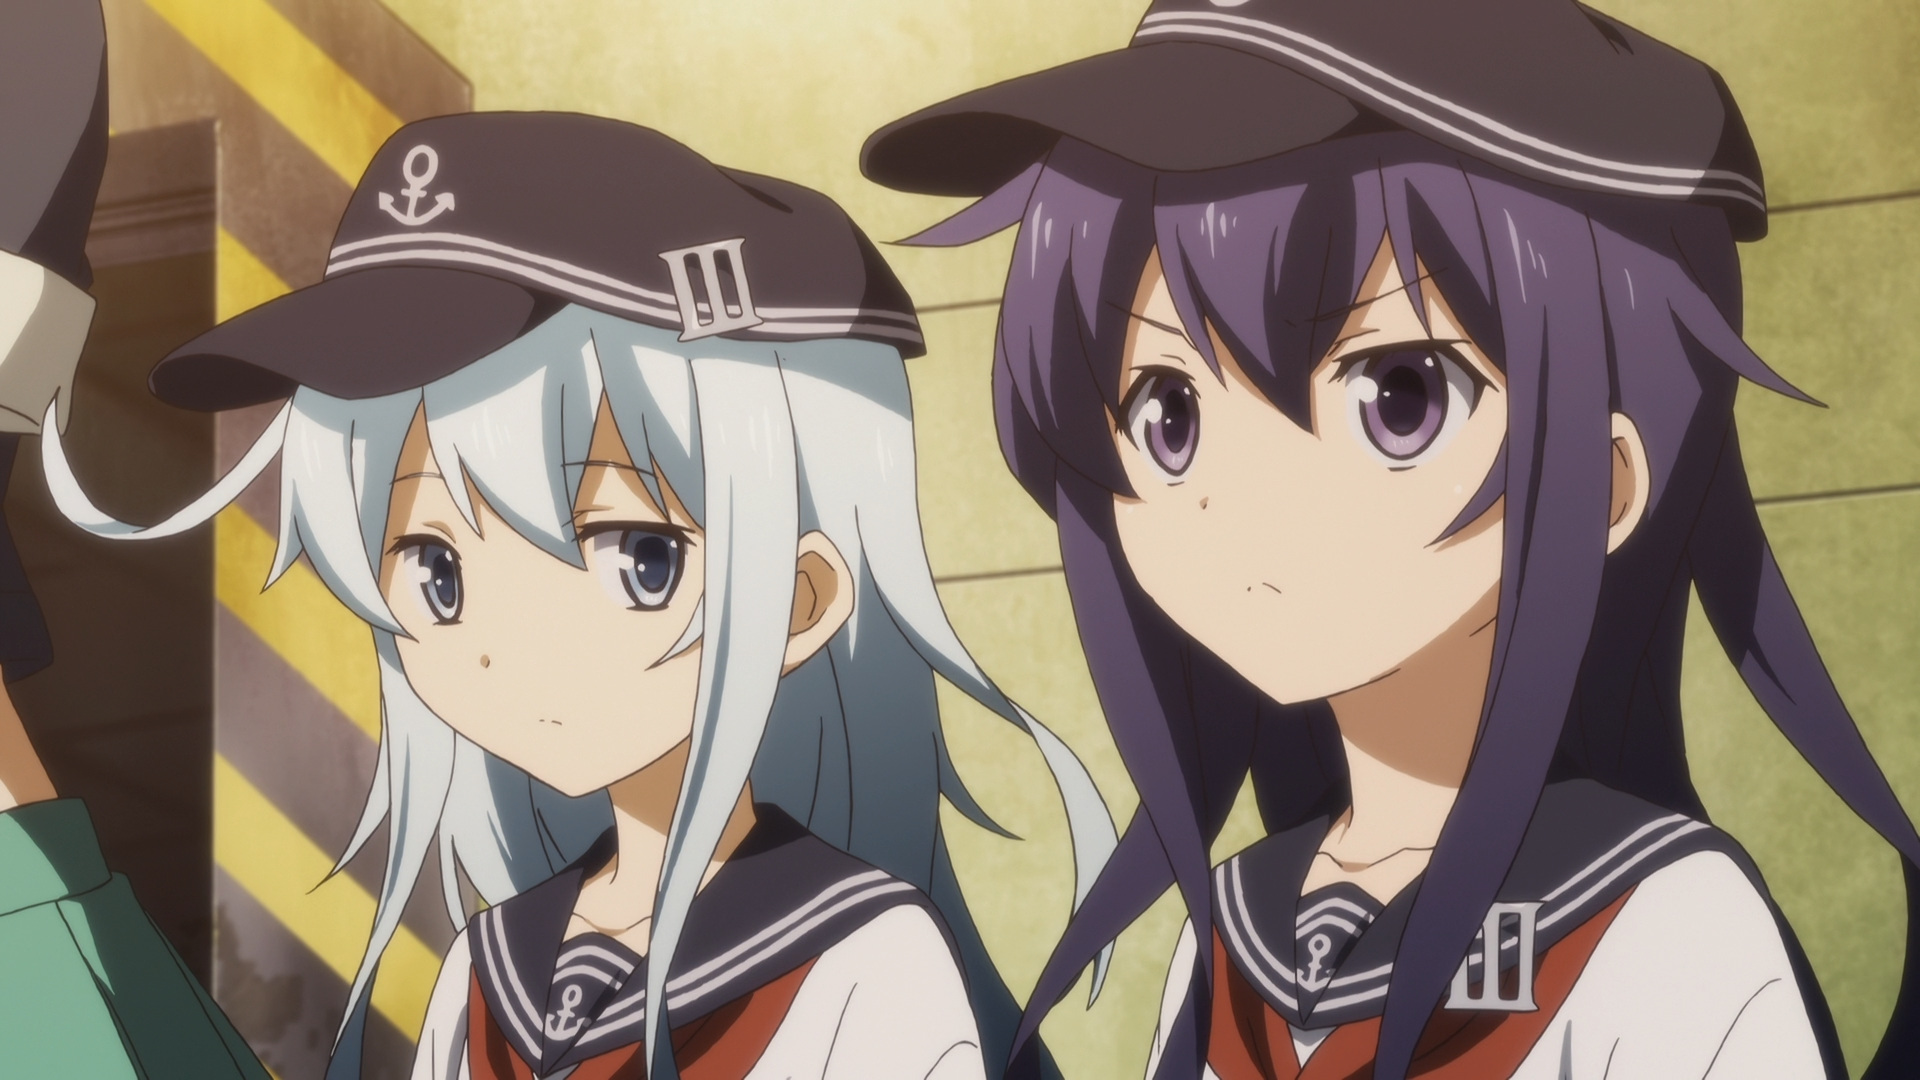 If you’re unaware, then KanColle was the first review posted here at Anime ...